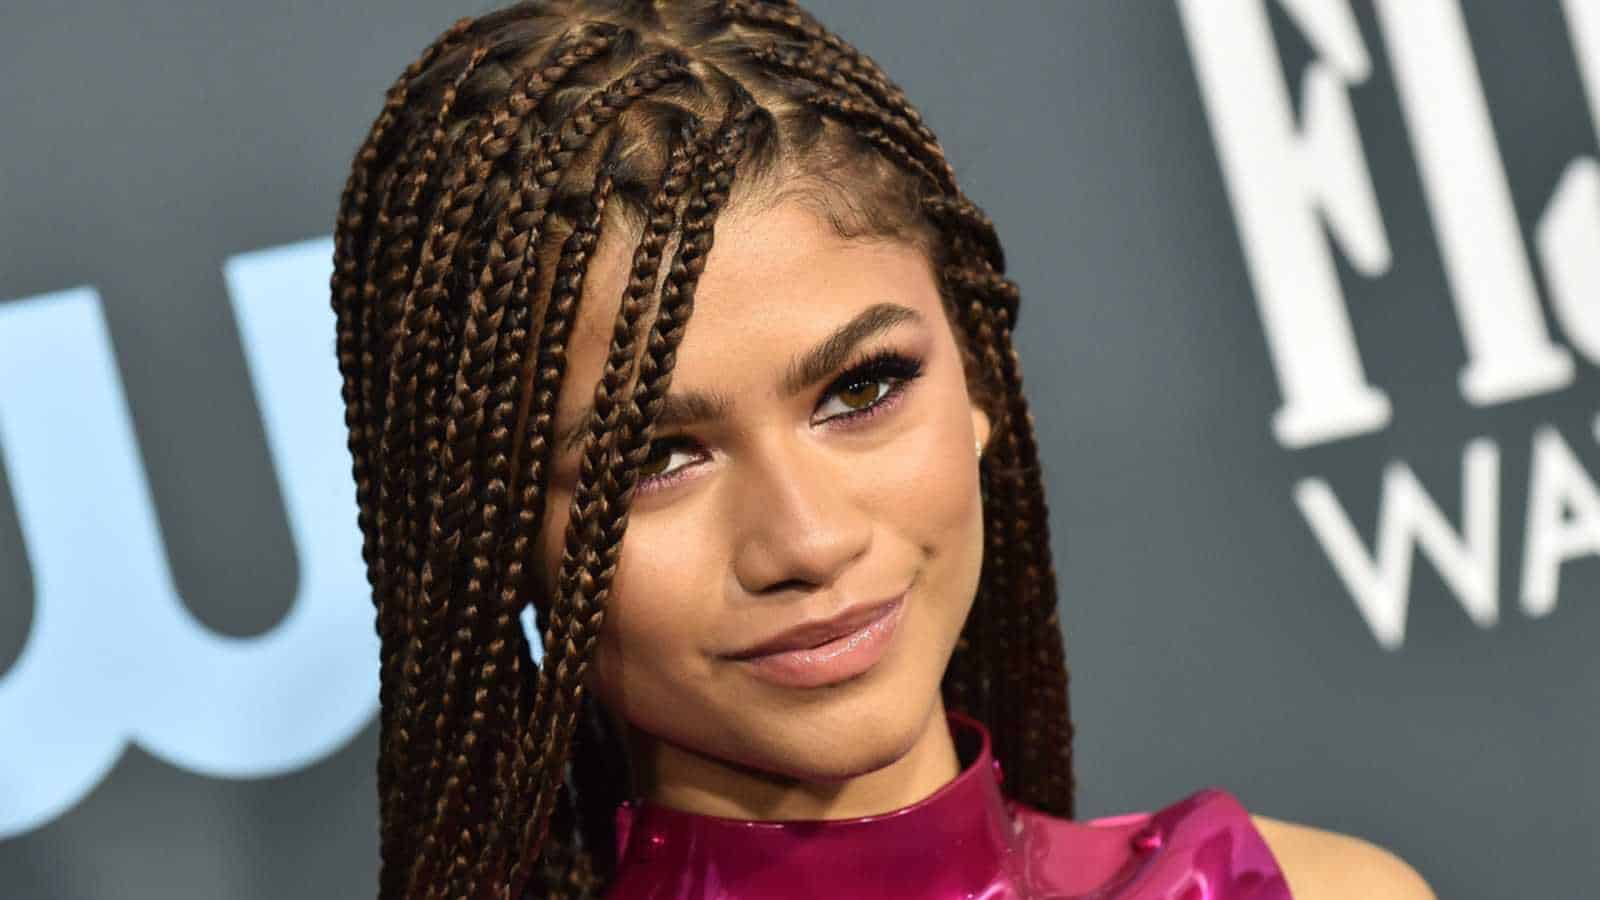 LOS ANGELES - JAN 12: Zendaya Coleman arrives for the 25th Annual Critics' Choice Awards on January 12, 2020 in Santa Monica, CA
